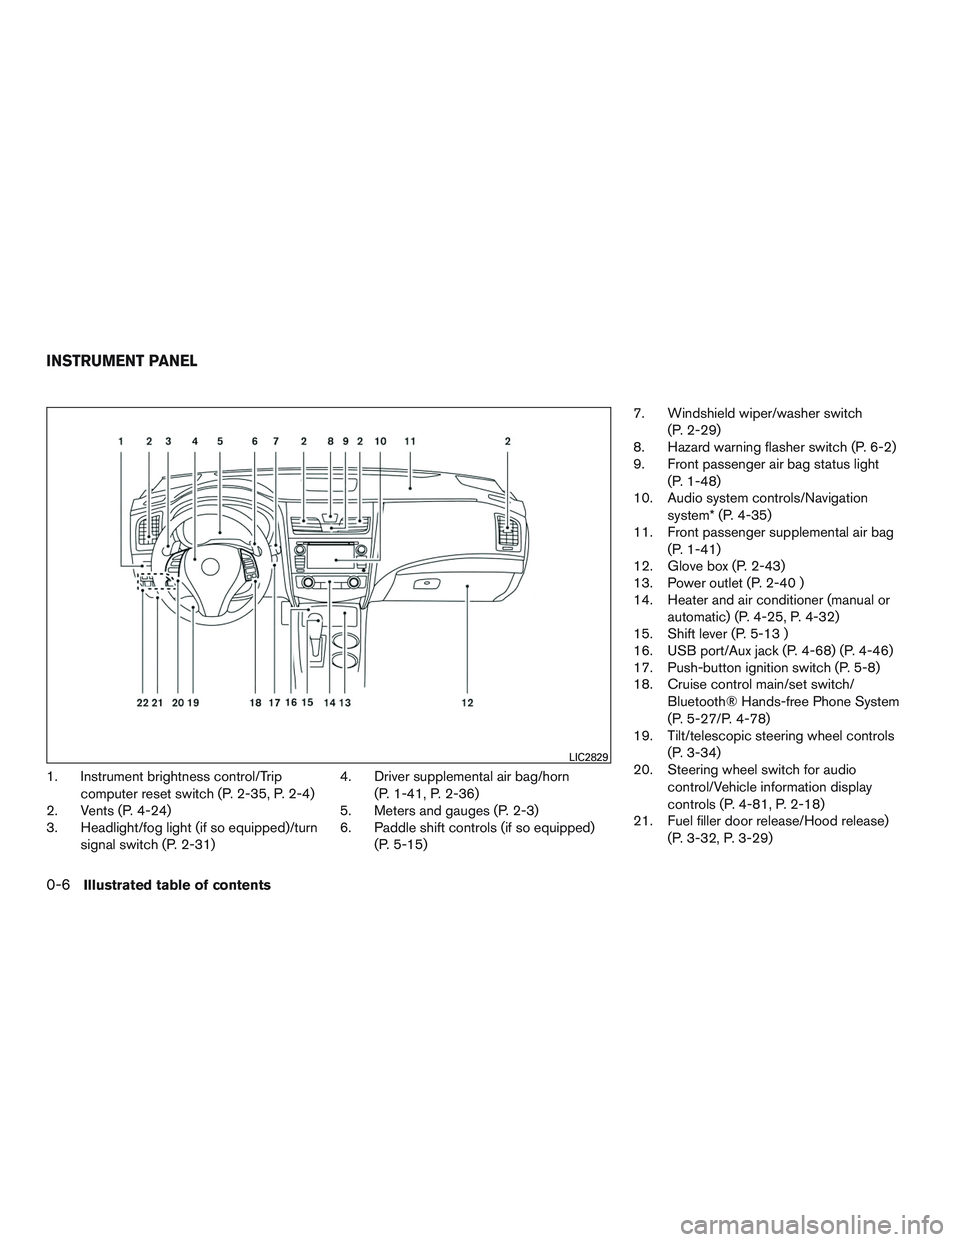 NISSAN ALTIMA SEDAN 2015  Owners Manual 1. Instrument brightness control/Tripcomputer reset switch (P. 2-35, P. 2-4)
2. Vents (P. 4-24)
3. Headlight/fog light (if so equipped)/turn
signal switch (P. 2-31) 4. Driver supplemental air bag/horn